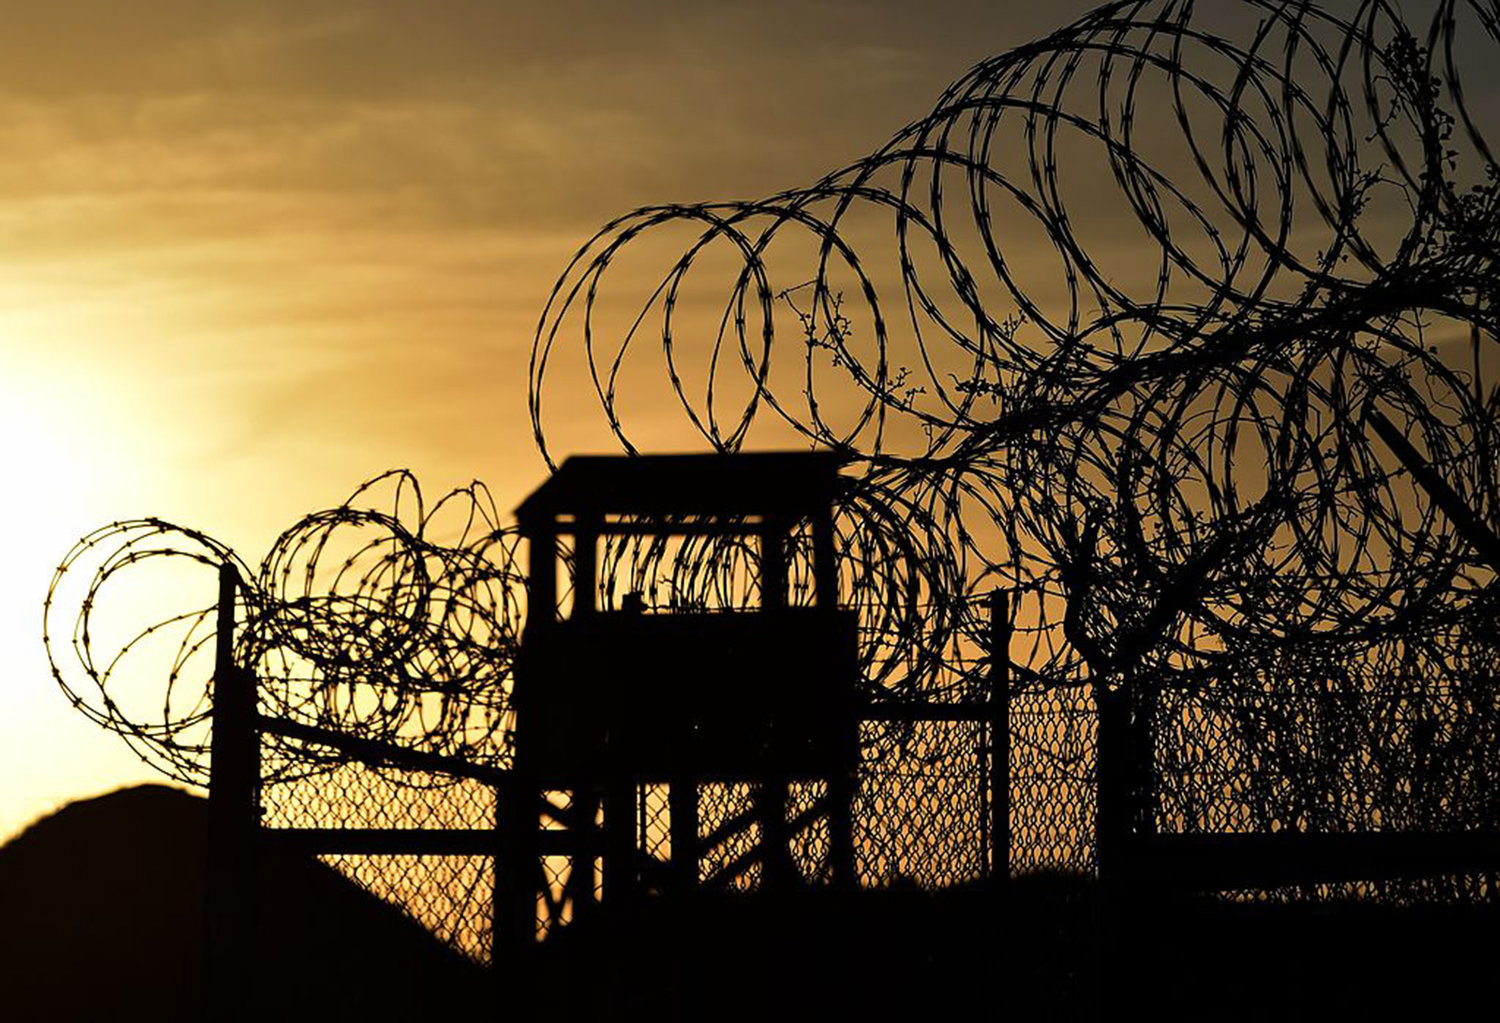 This photo made during an escorted visit and reviewed by the US military, shows the razor wire-topped fence and a watch tower at the abandoned "Camp X-Ray" detention facility at the US Naval Station in Guantanamo Bay, Cuba, April 9, 2014. (Mladen Antonov/AFP via Getty Images/TNS)